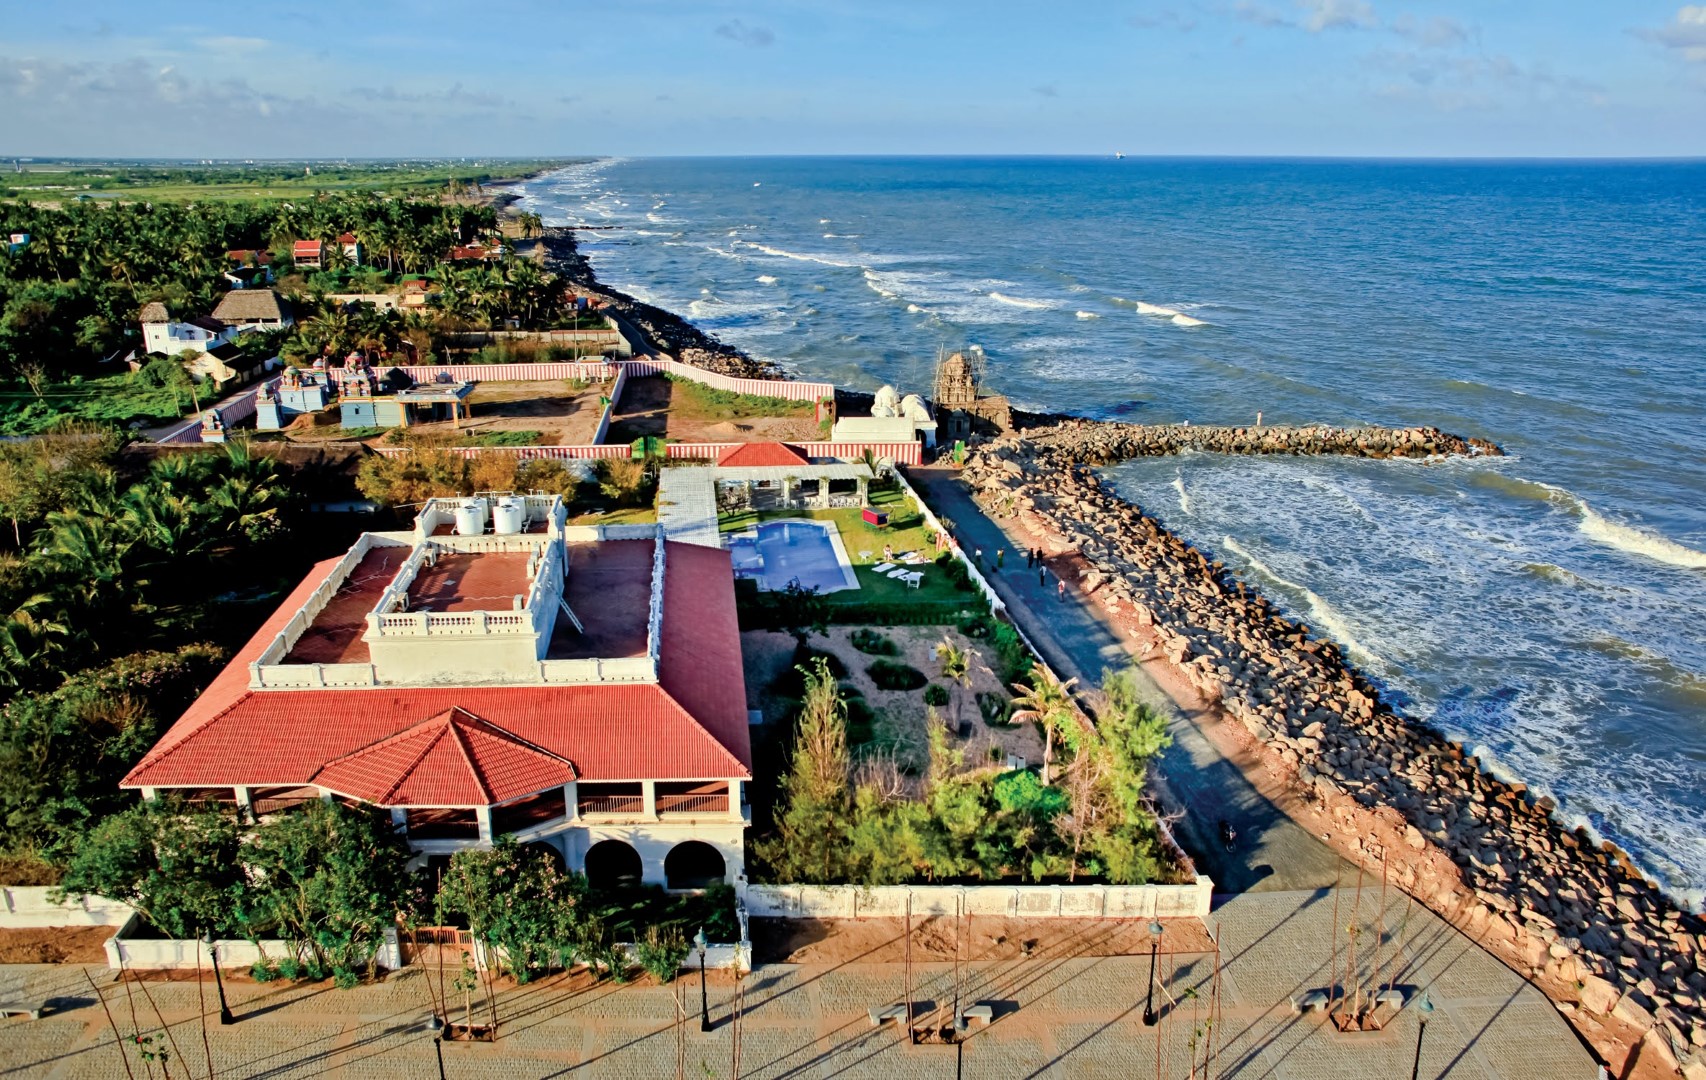 A trip back in time to Tranquebar, Denmark’s forgotten outpost in India